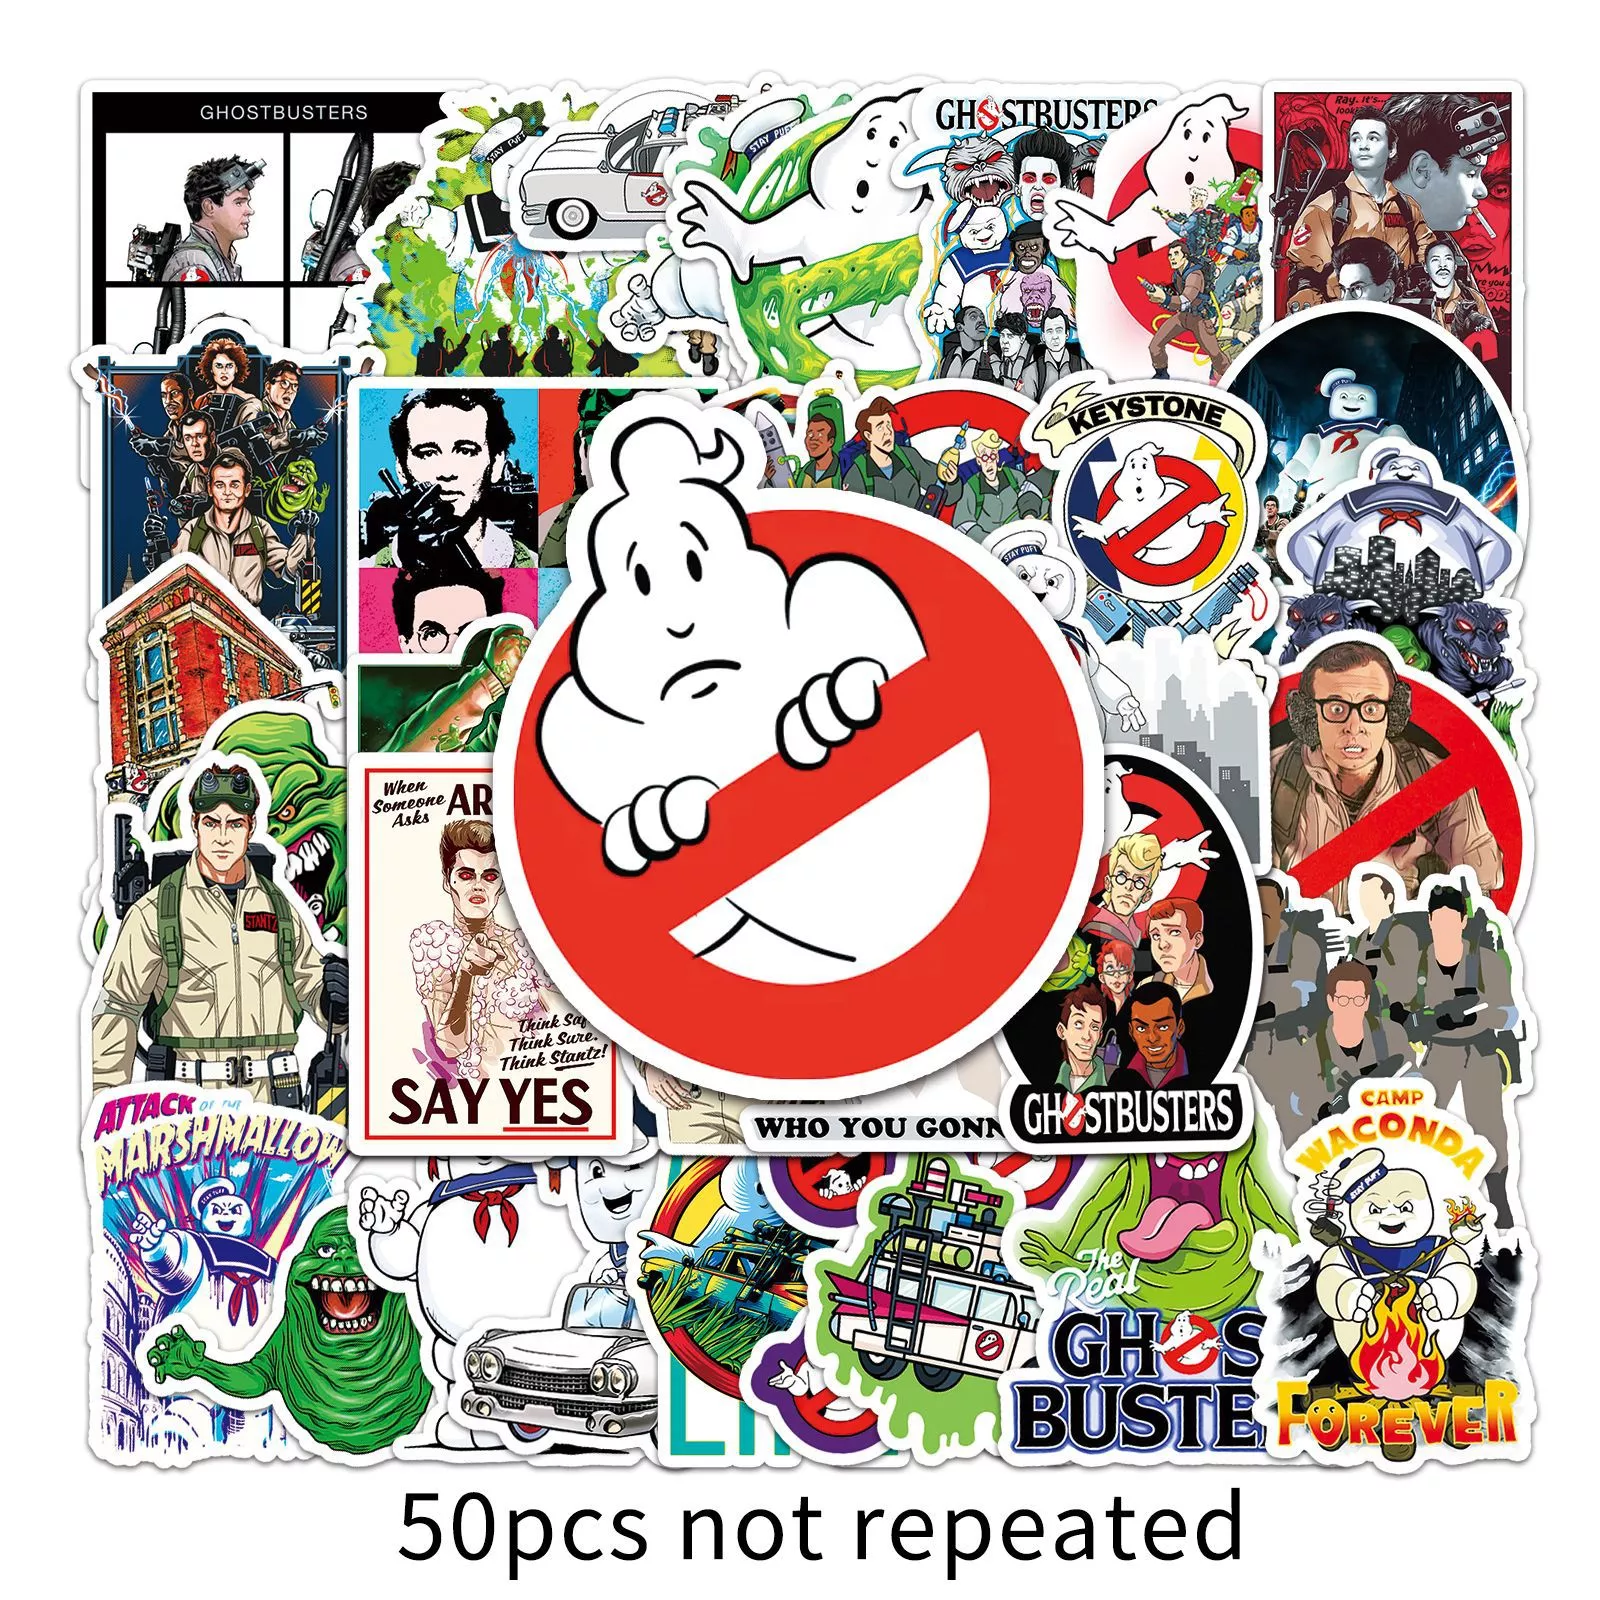 10/30/50pcs  Ghostbuster U.s. Drama Stickers Scooter Luggage Compartment Scrapbook Notebook Computer Diycar Motorcycle Stickers 10 30 50pcs daily shot inspirational phrases graffiti stickers suitcase refrigerator notebook hand account stickers wholesale